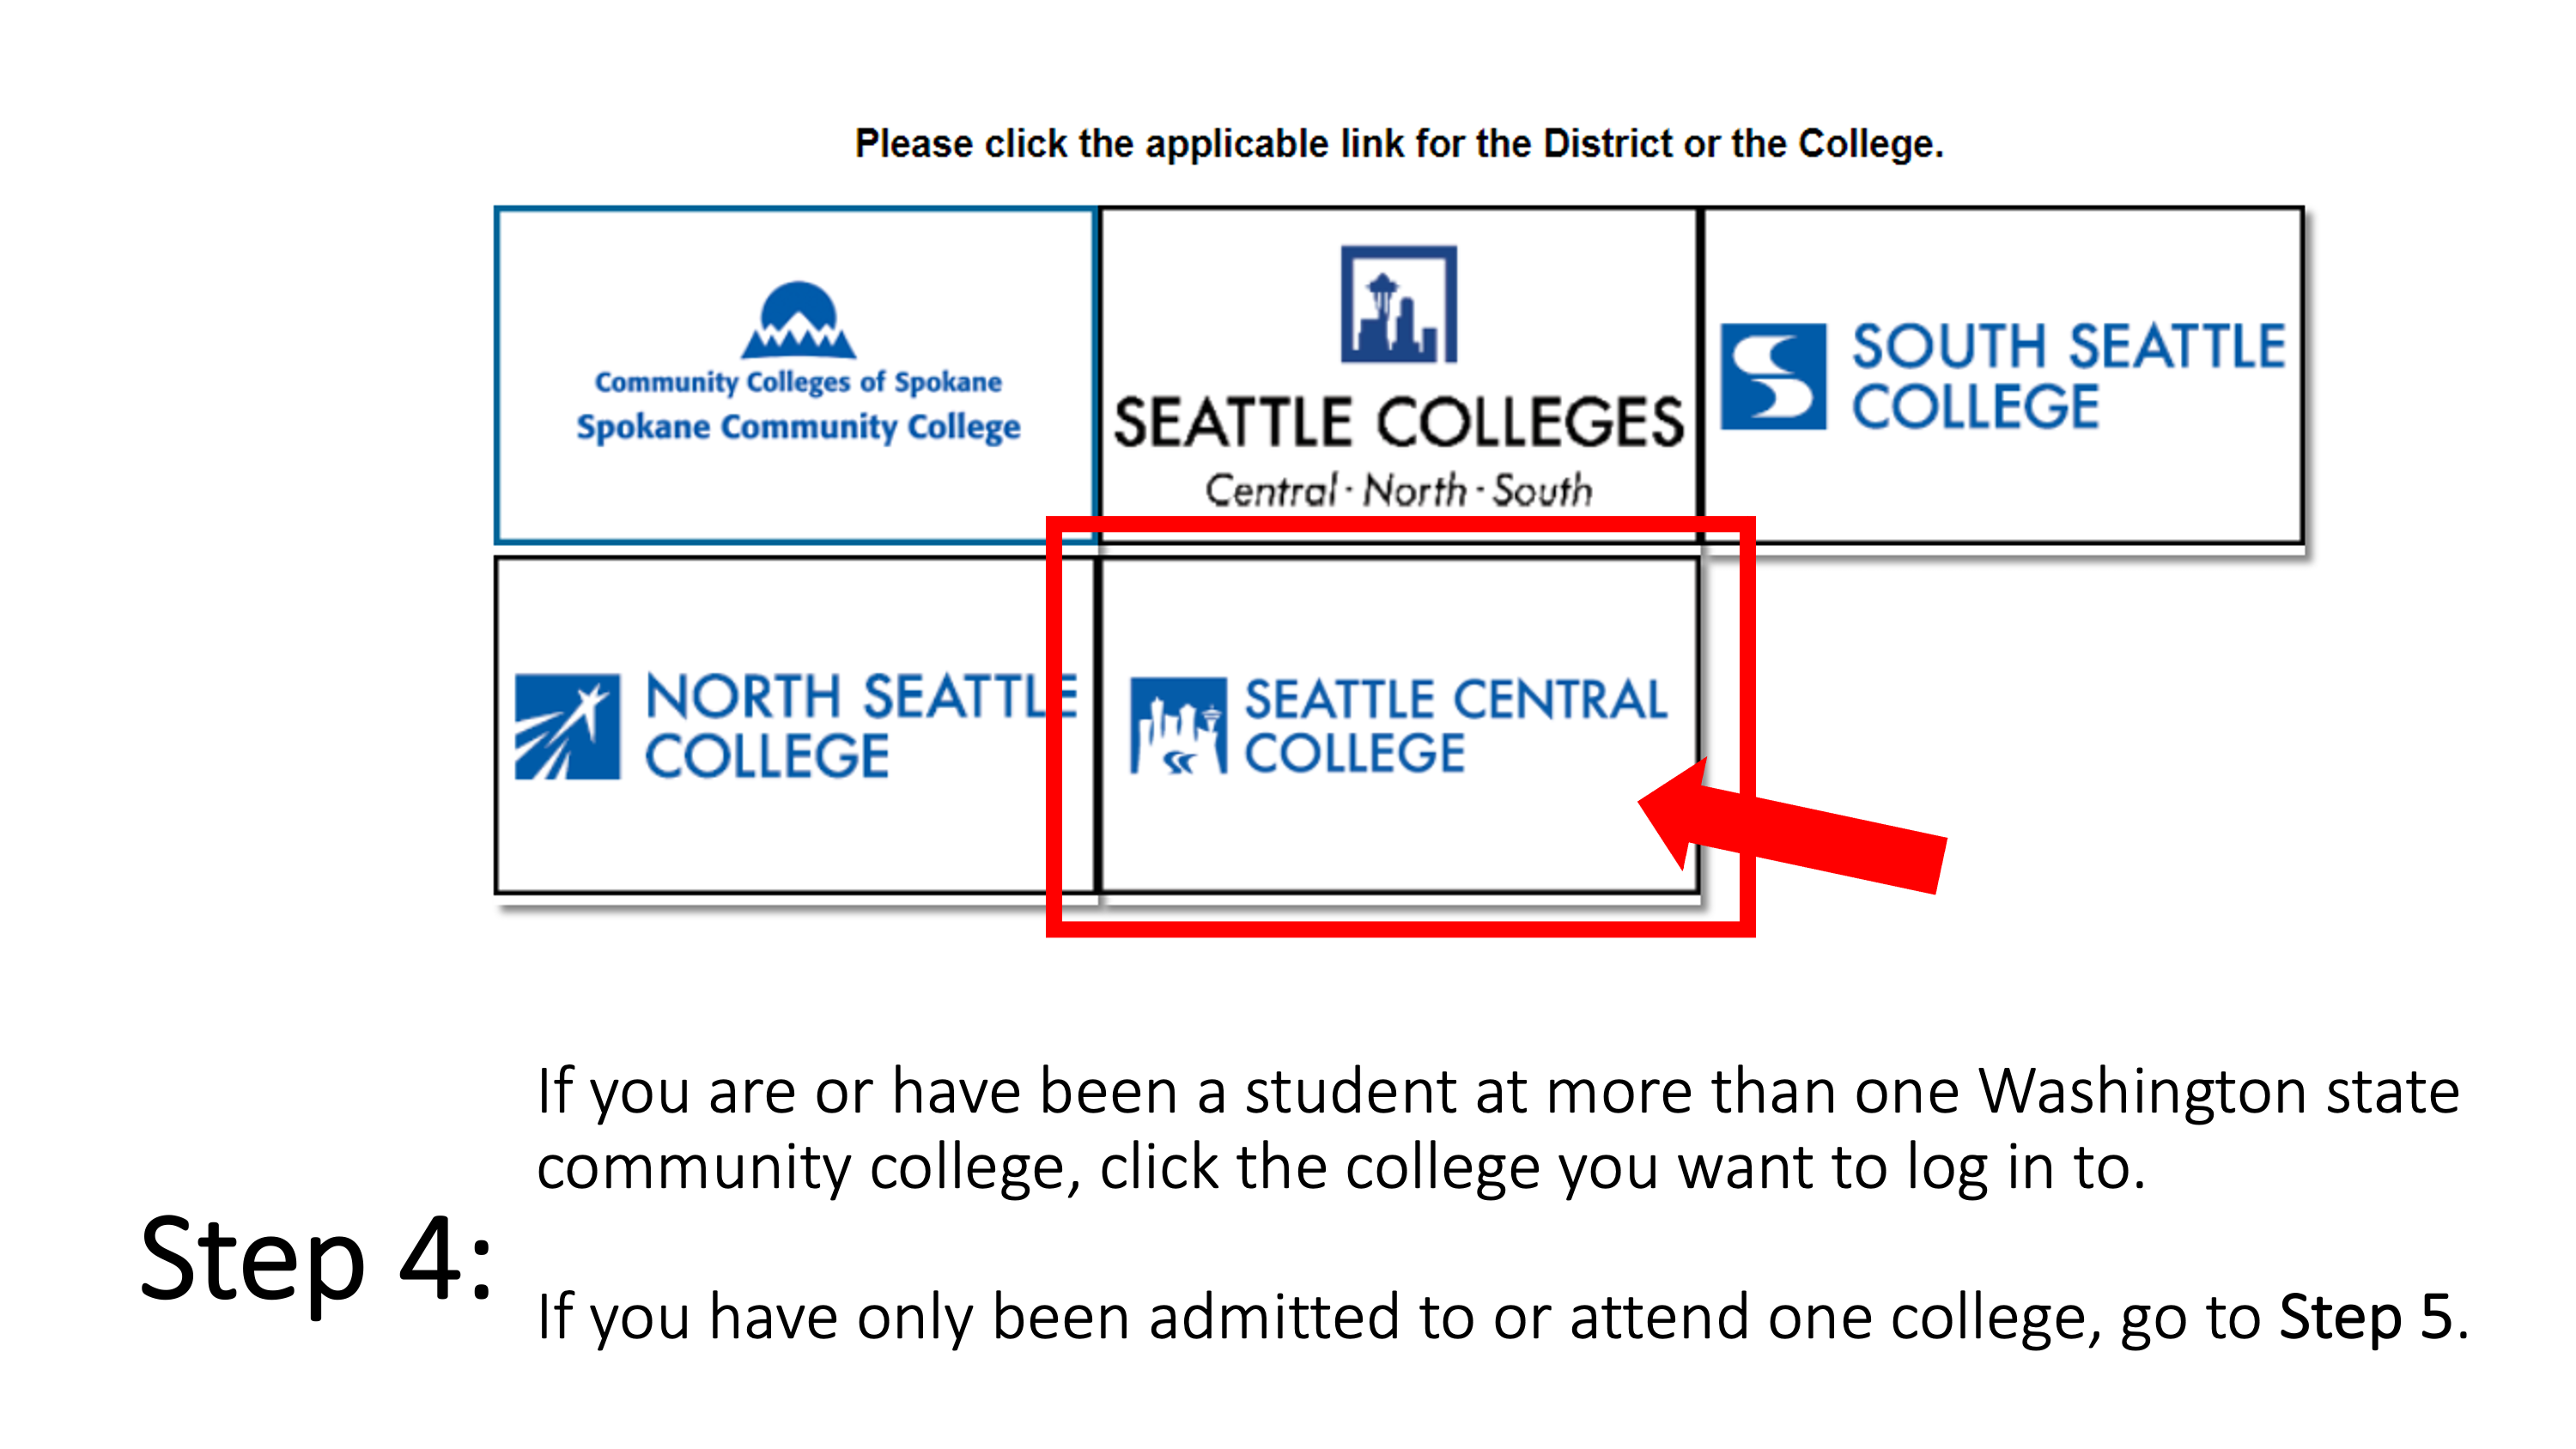 If you are or have been a student at more than one Washington state community college, click the college you want to log in to. 